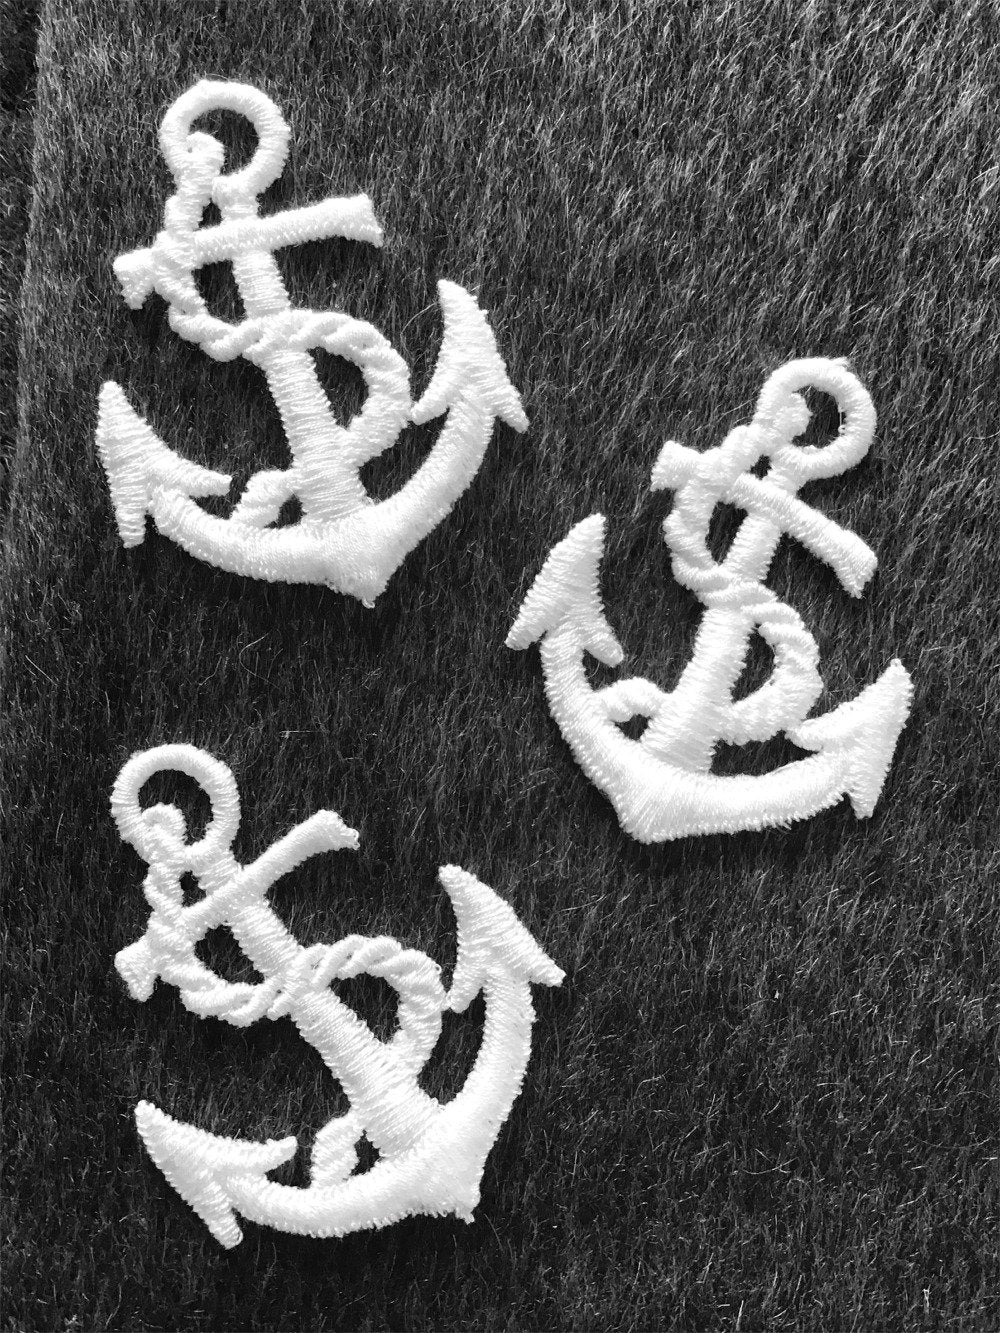 White Embroidery Anchor Vintage Decorative Patch #5000